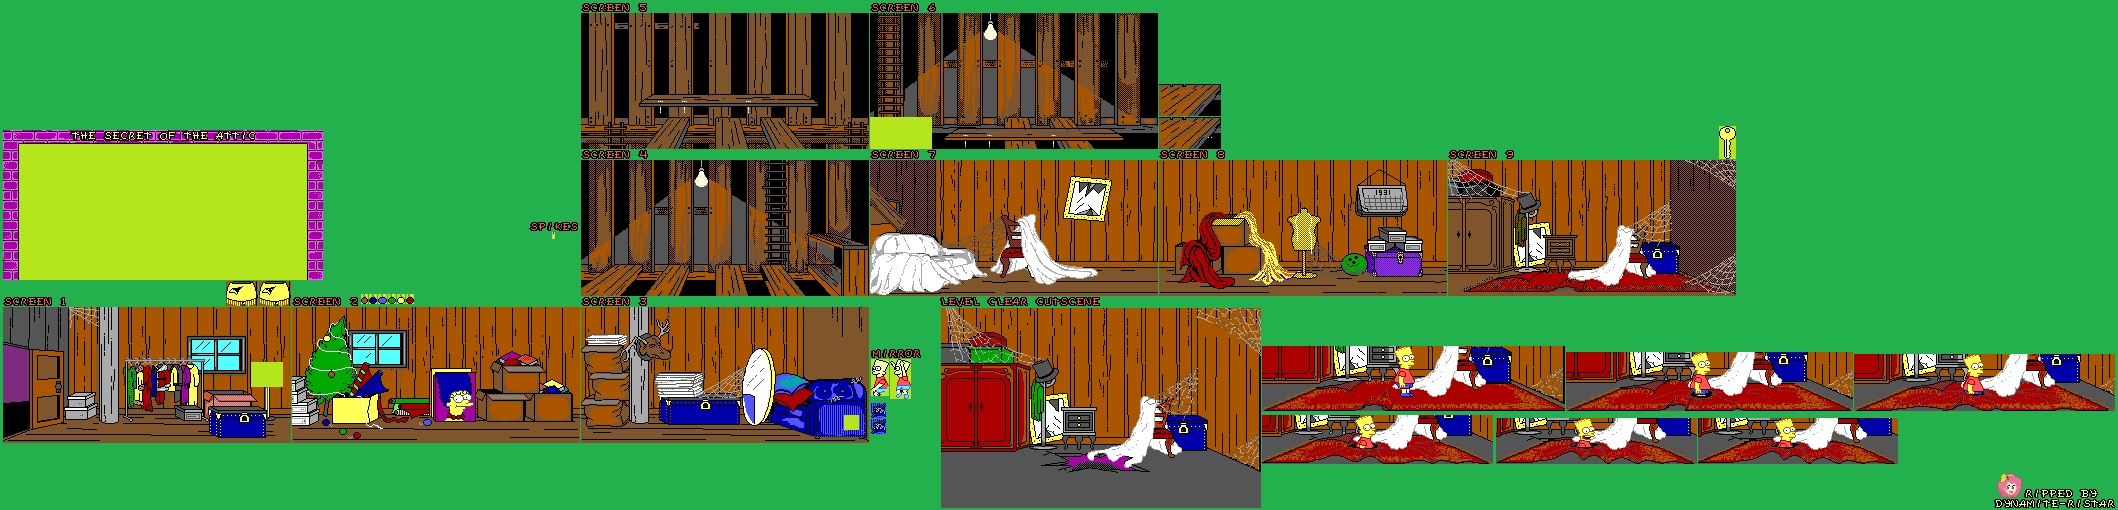 Bart Simpson's House of Weirdness (DOS) - The Secret of the Attic